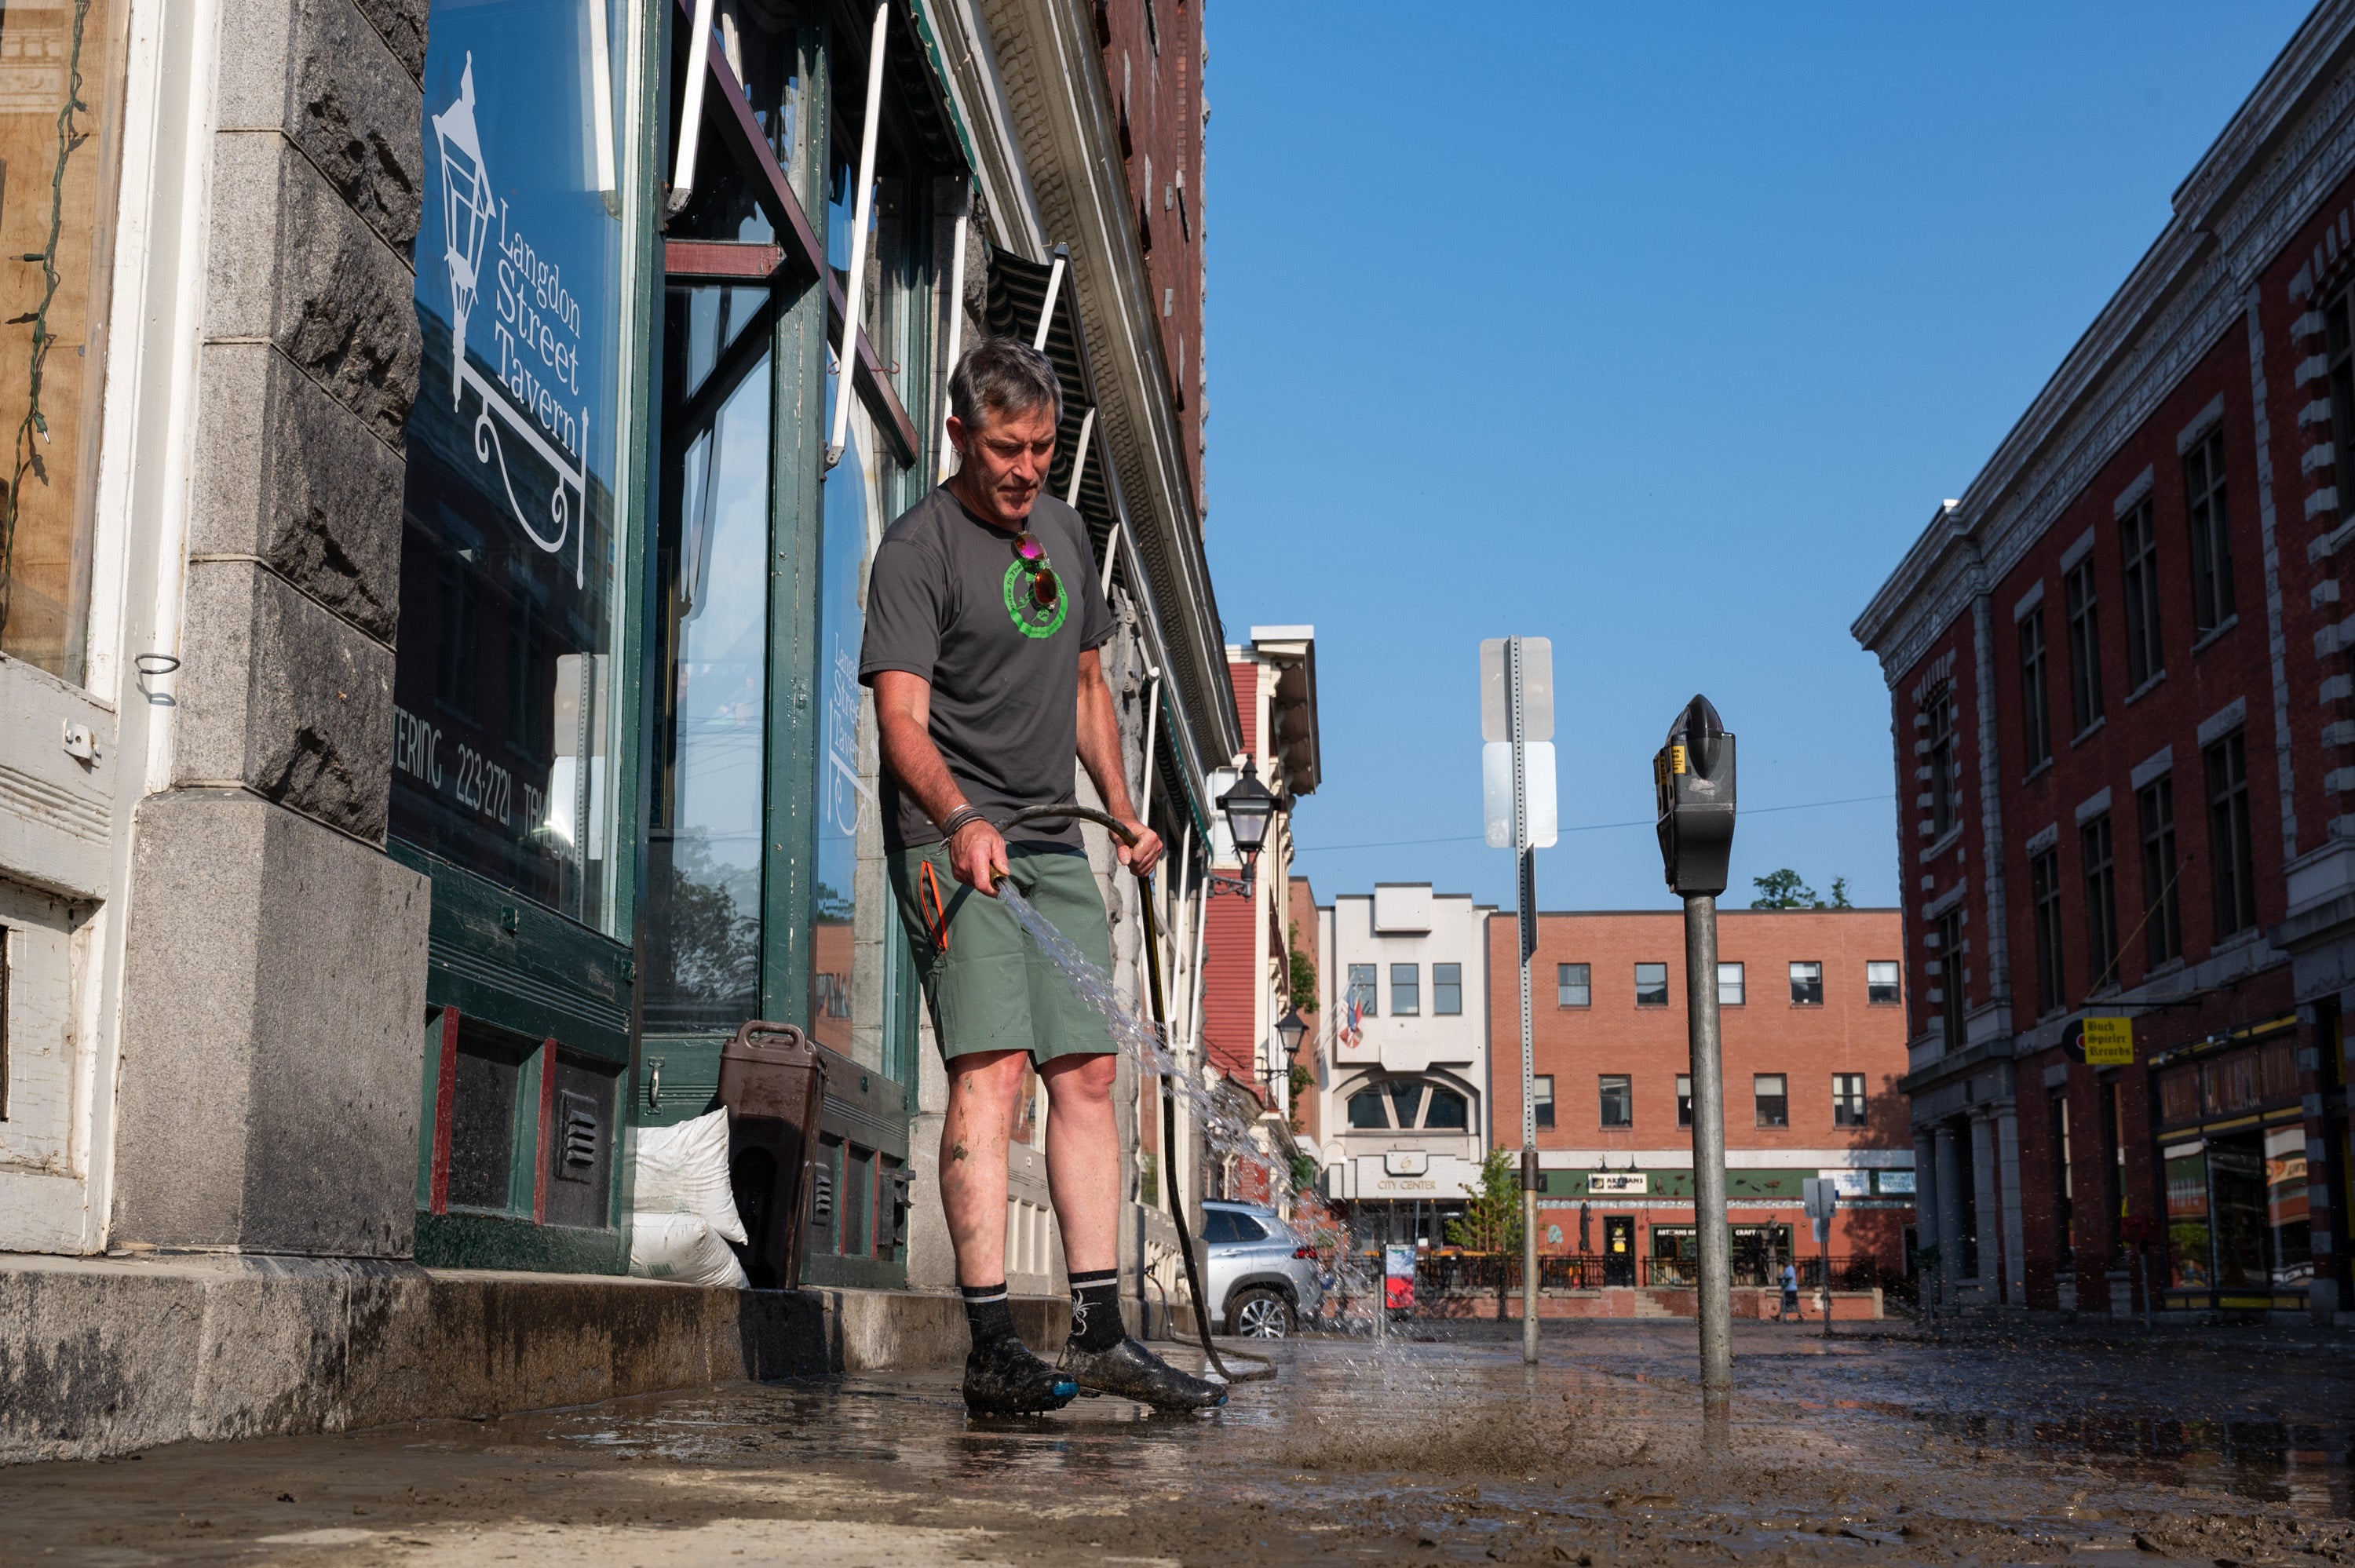 Andrew Brewer, a resident of Montpelier and former business owner on Langdon Street, helps wash away the mud from the sidewalk